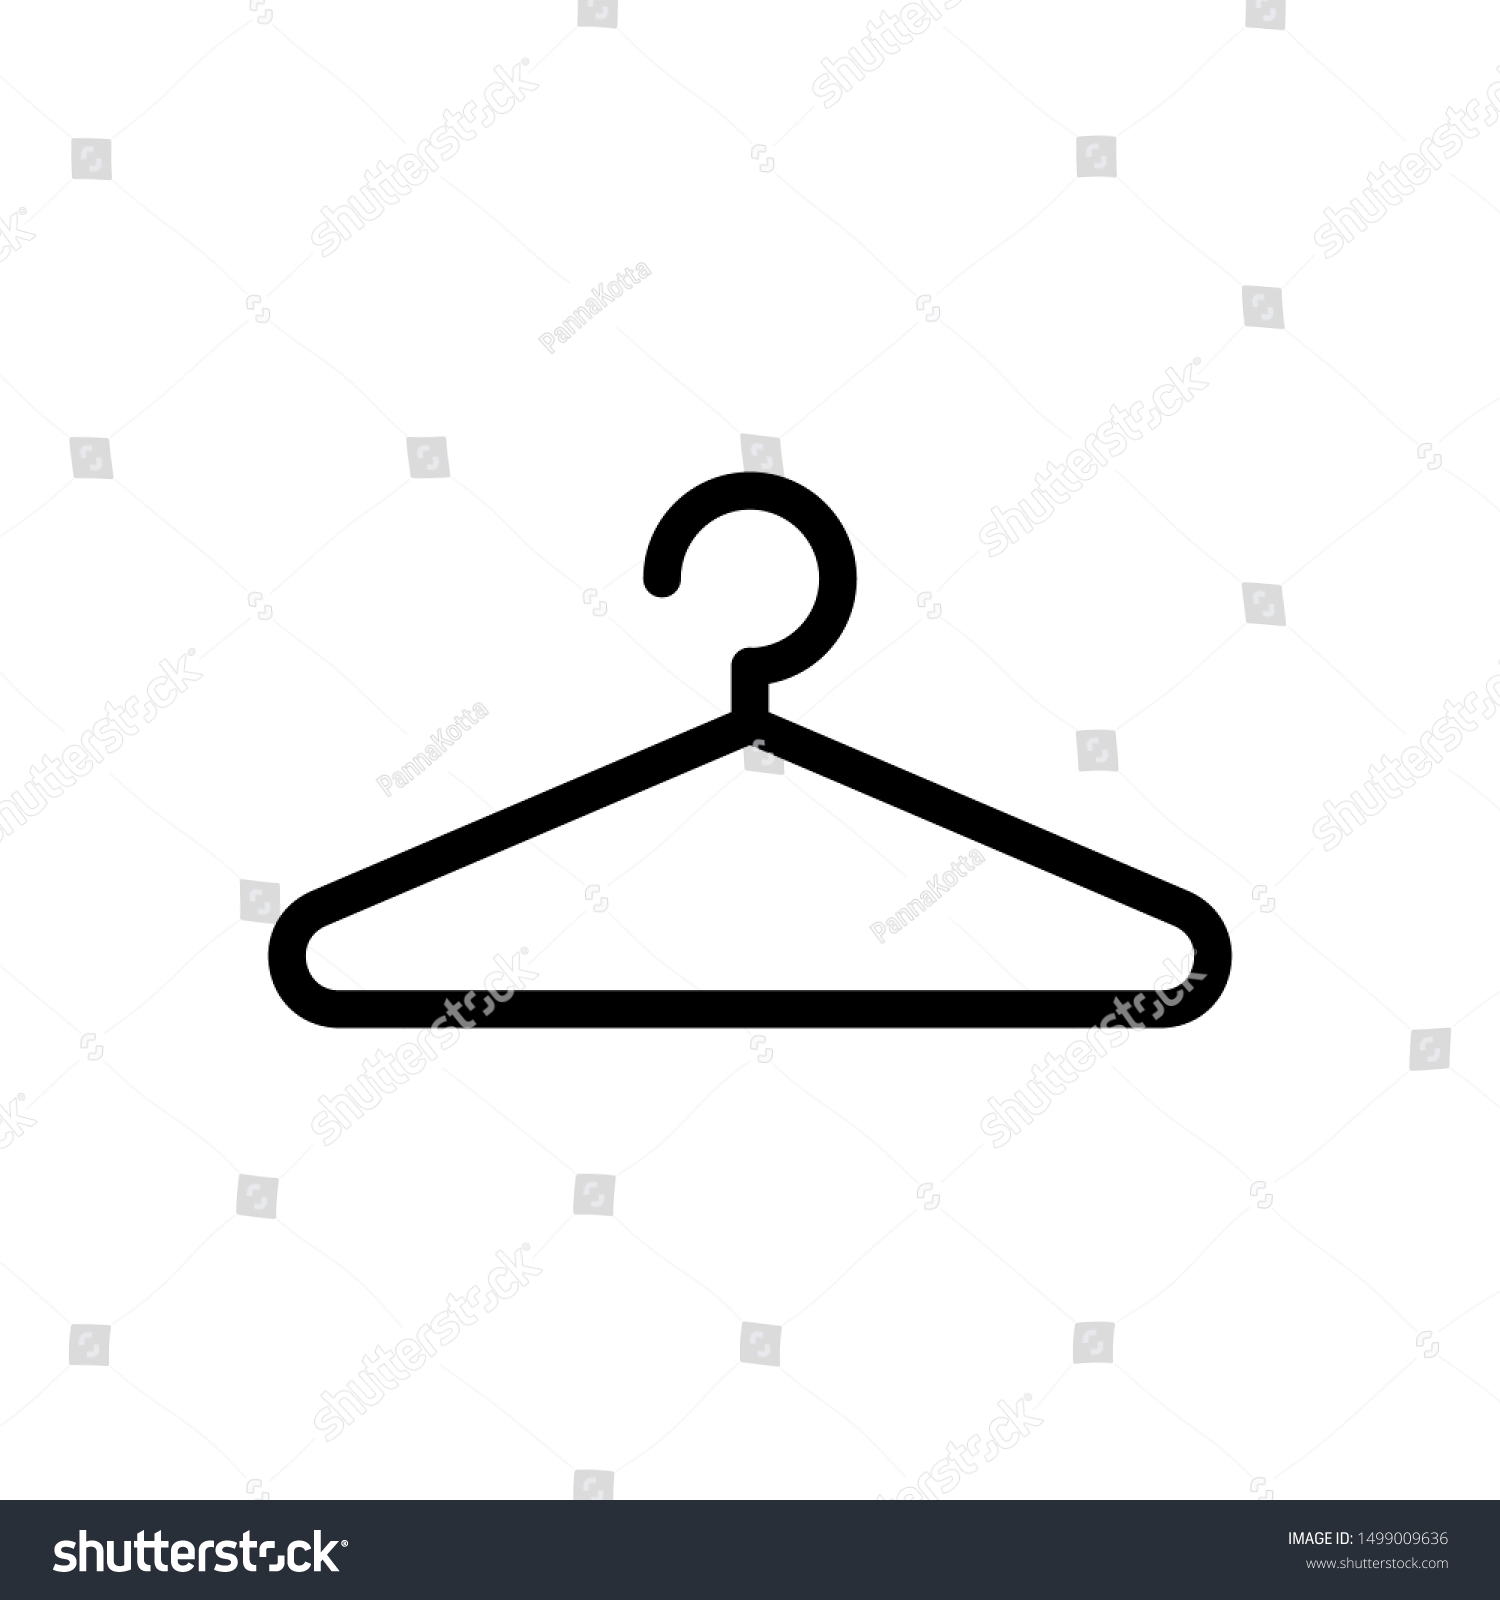 Clothes hanger. Hanger icon vector isolated on white background #1499009636